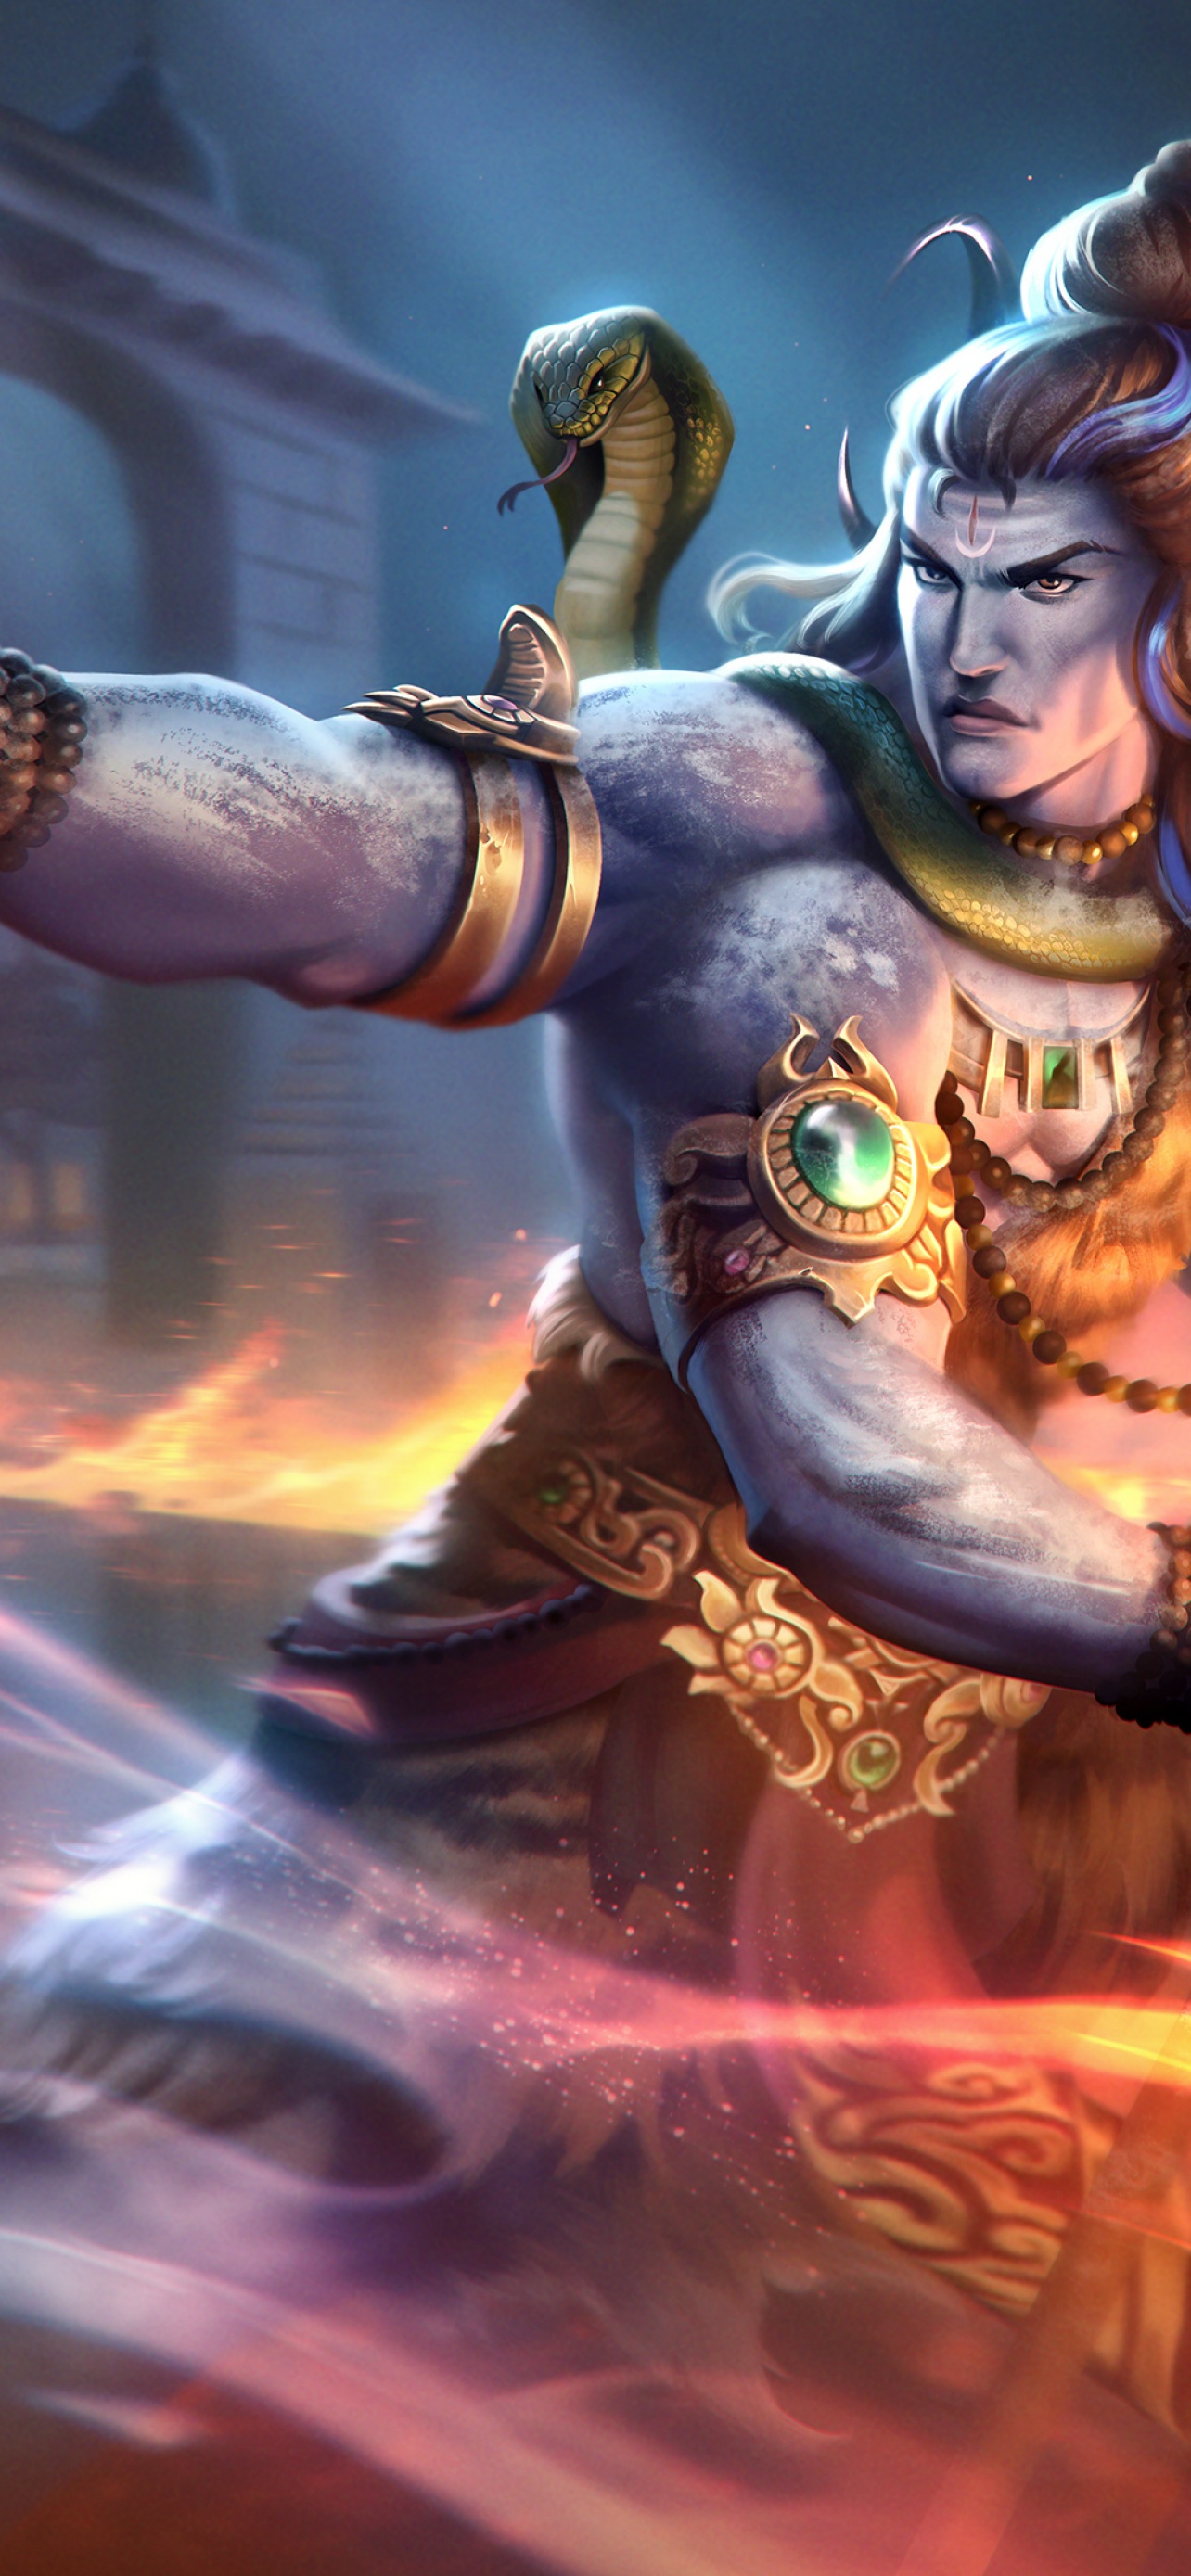 Lord Shiva Wallpaper 4K, The Destroyer, Smite, Games, #7297